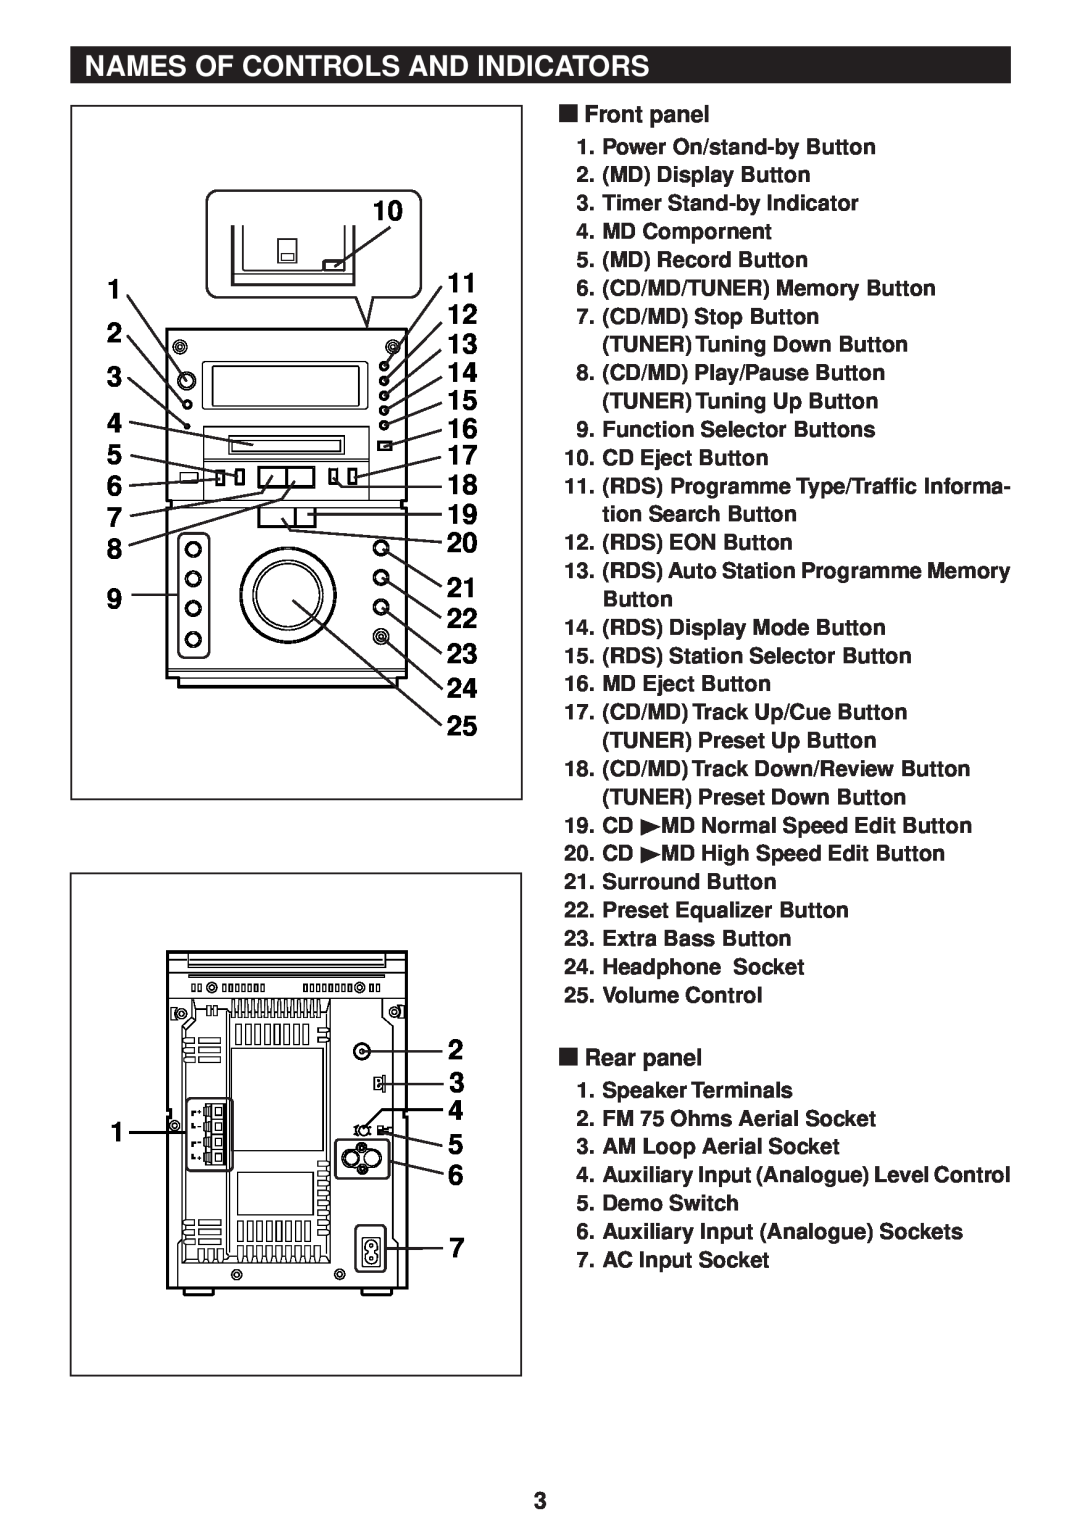 Sharp MD-M3H operation manual Names Of Controls And Indicators, Front panel, Rear panel 